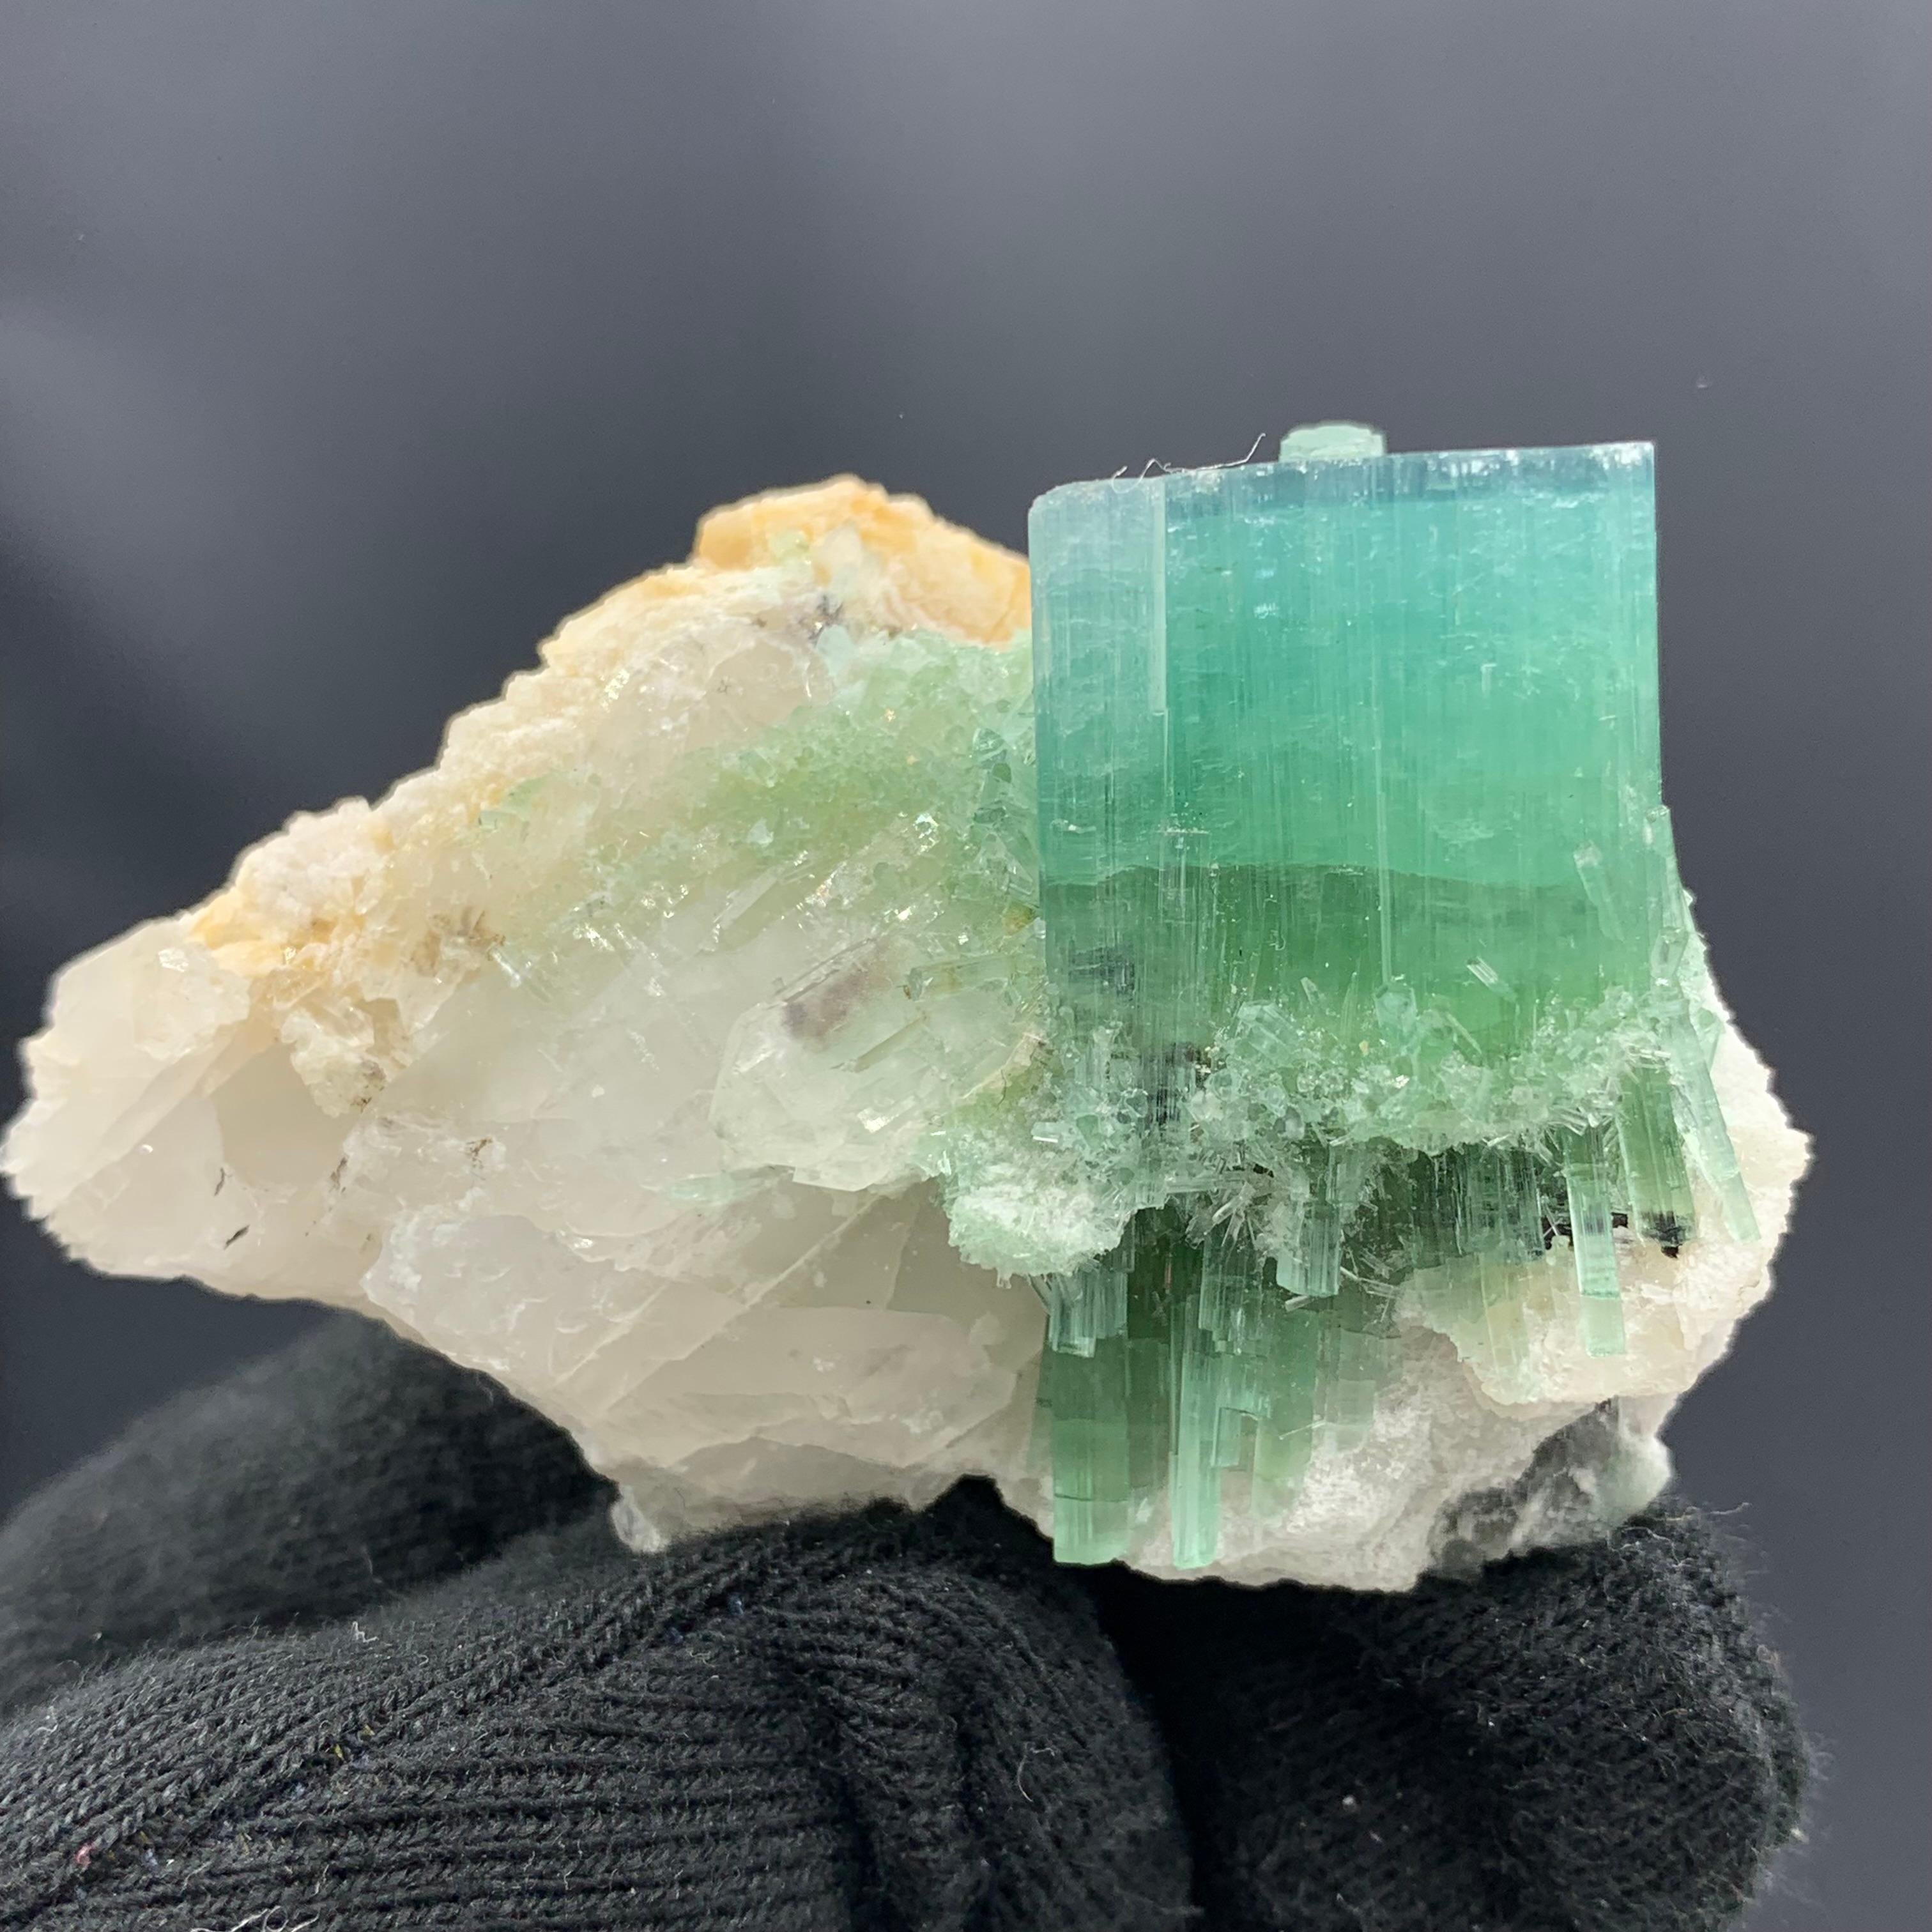 64.13 Gram Incredible Blue Cap Tri Colour Tourmaline Specimen From Afghanistan 

Weight: 64.13 Gram
Dimension: 3.9 x 5.7 x 3.4 Cm
Origin: kunar, Afghanistan 


Tourmaline is a crystalline silicate mineral group in which boron is compounded with